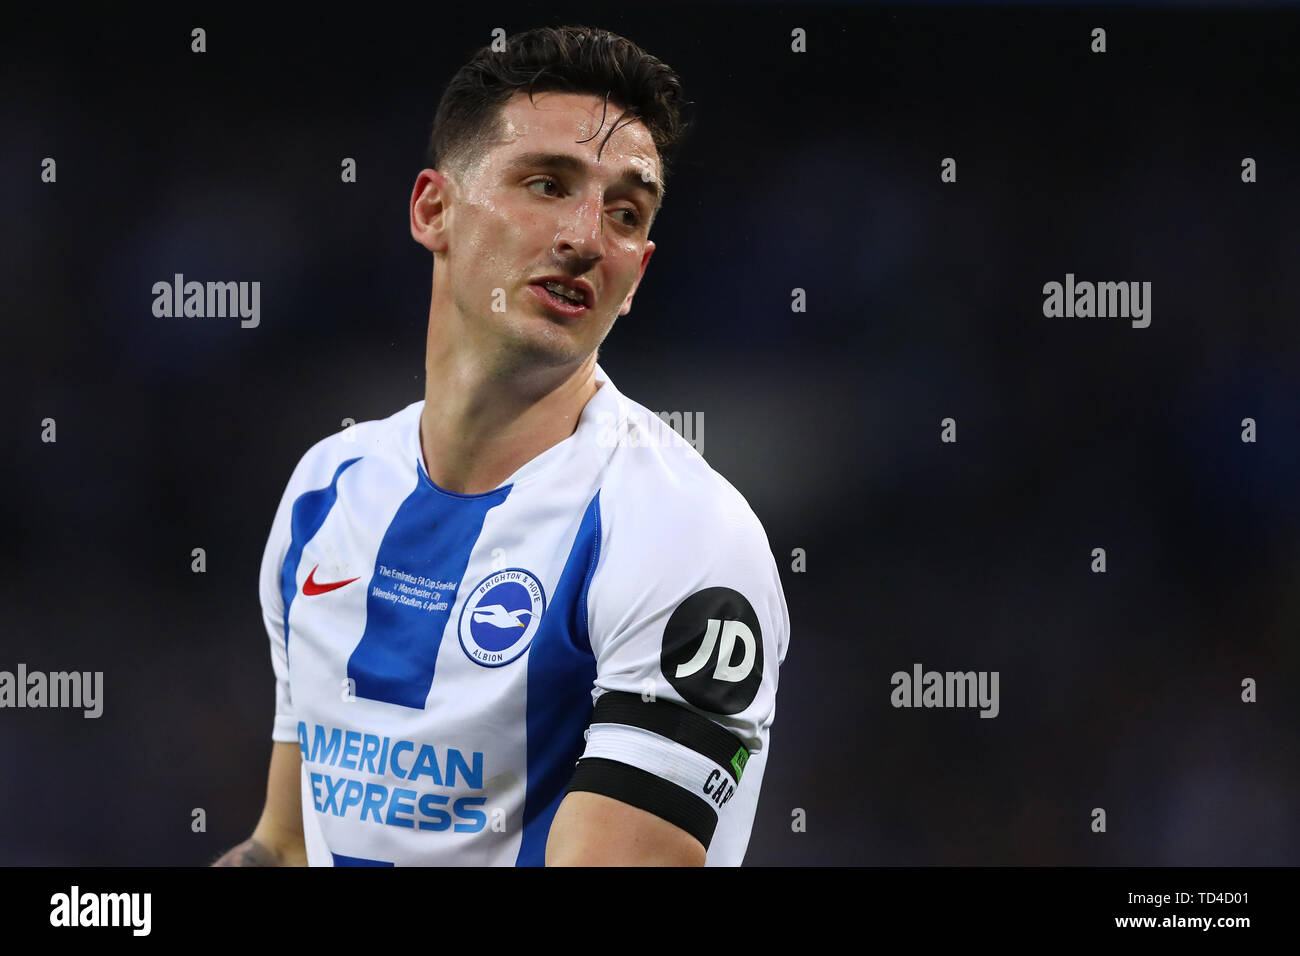 Lewis Dunk of Brighton & Hove Albion - Manchester City v Brighton & Hove Albion, The Emirates FA Cup Semi Final, Wembley Stadium, London - 6th April 2019  Editorial Use Only Stock Photo